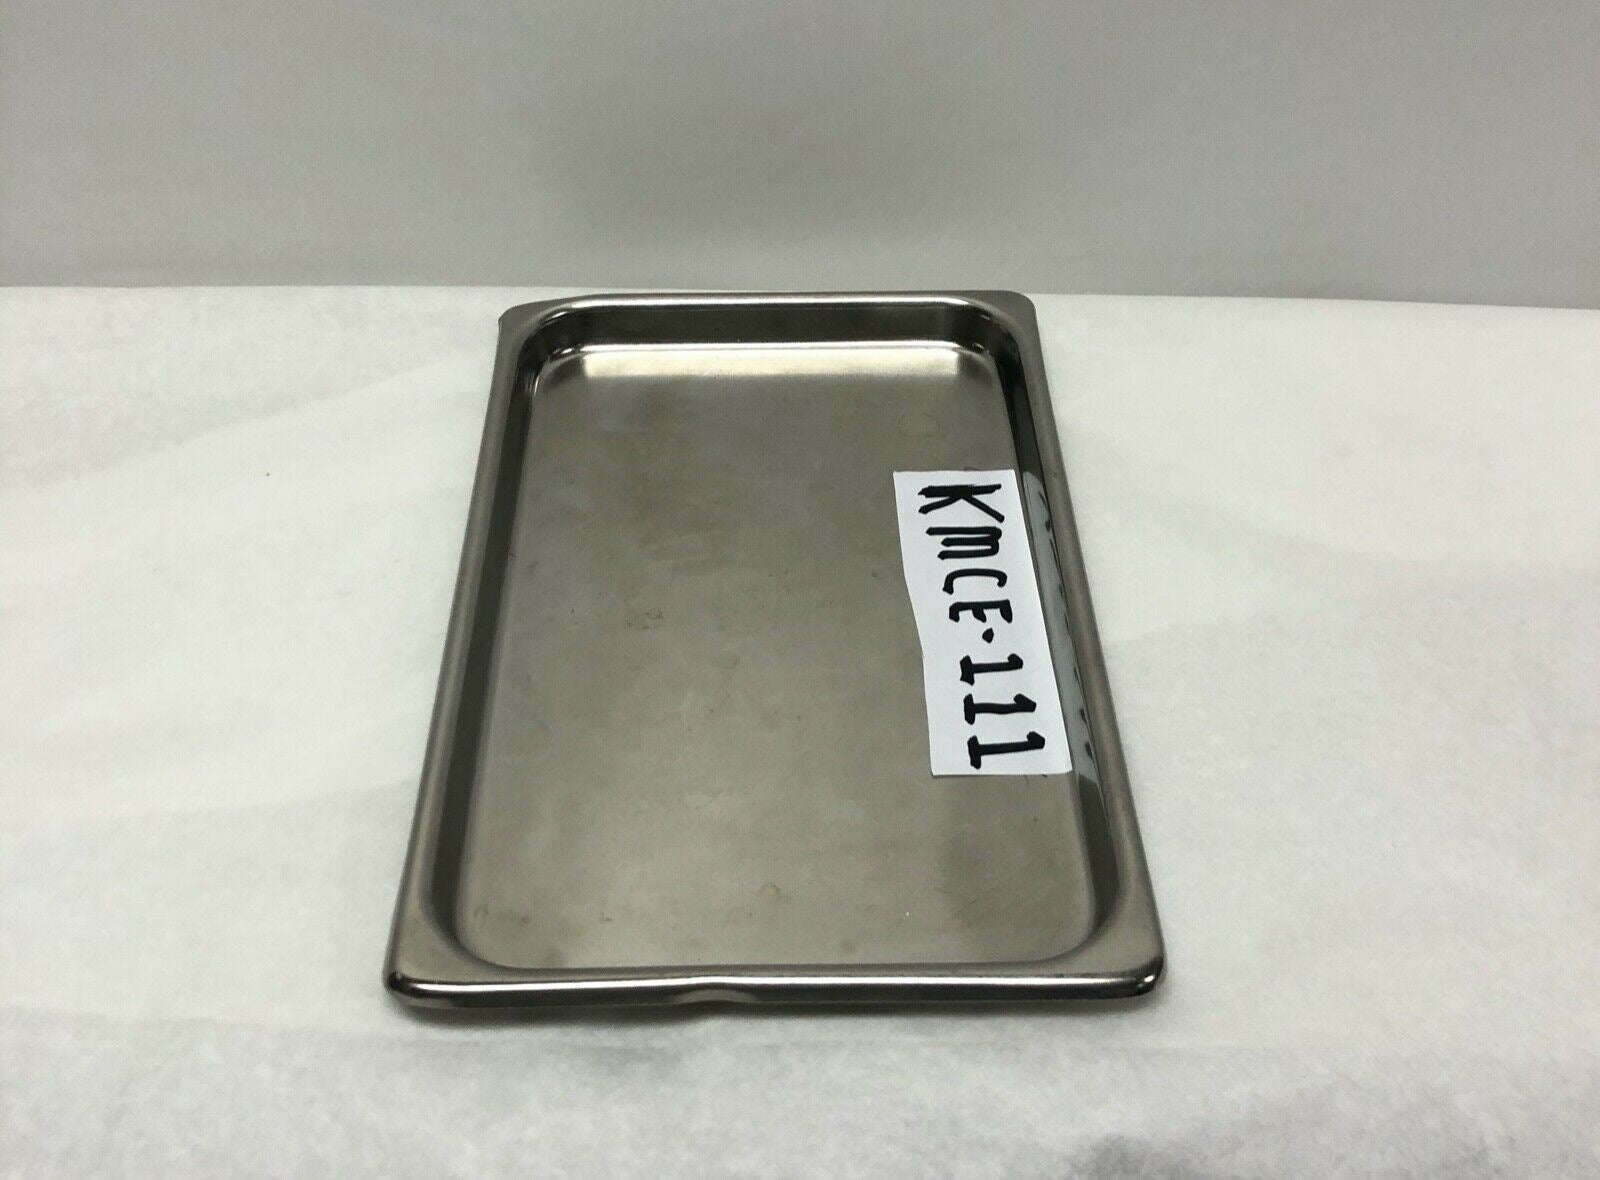 Polar Ware 10FF Stainless Steel Tray | KMCE-111 DIAGNOSTIC ULTRASOUND MACHINES FOR SALE